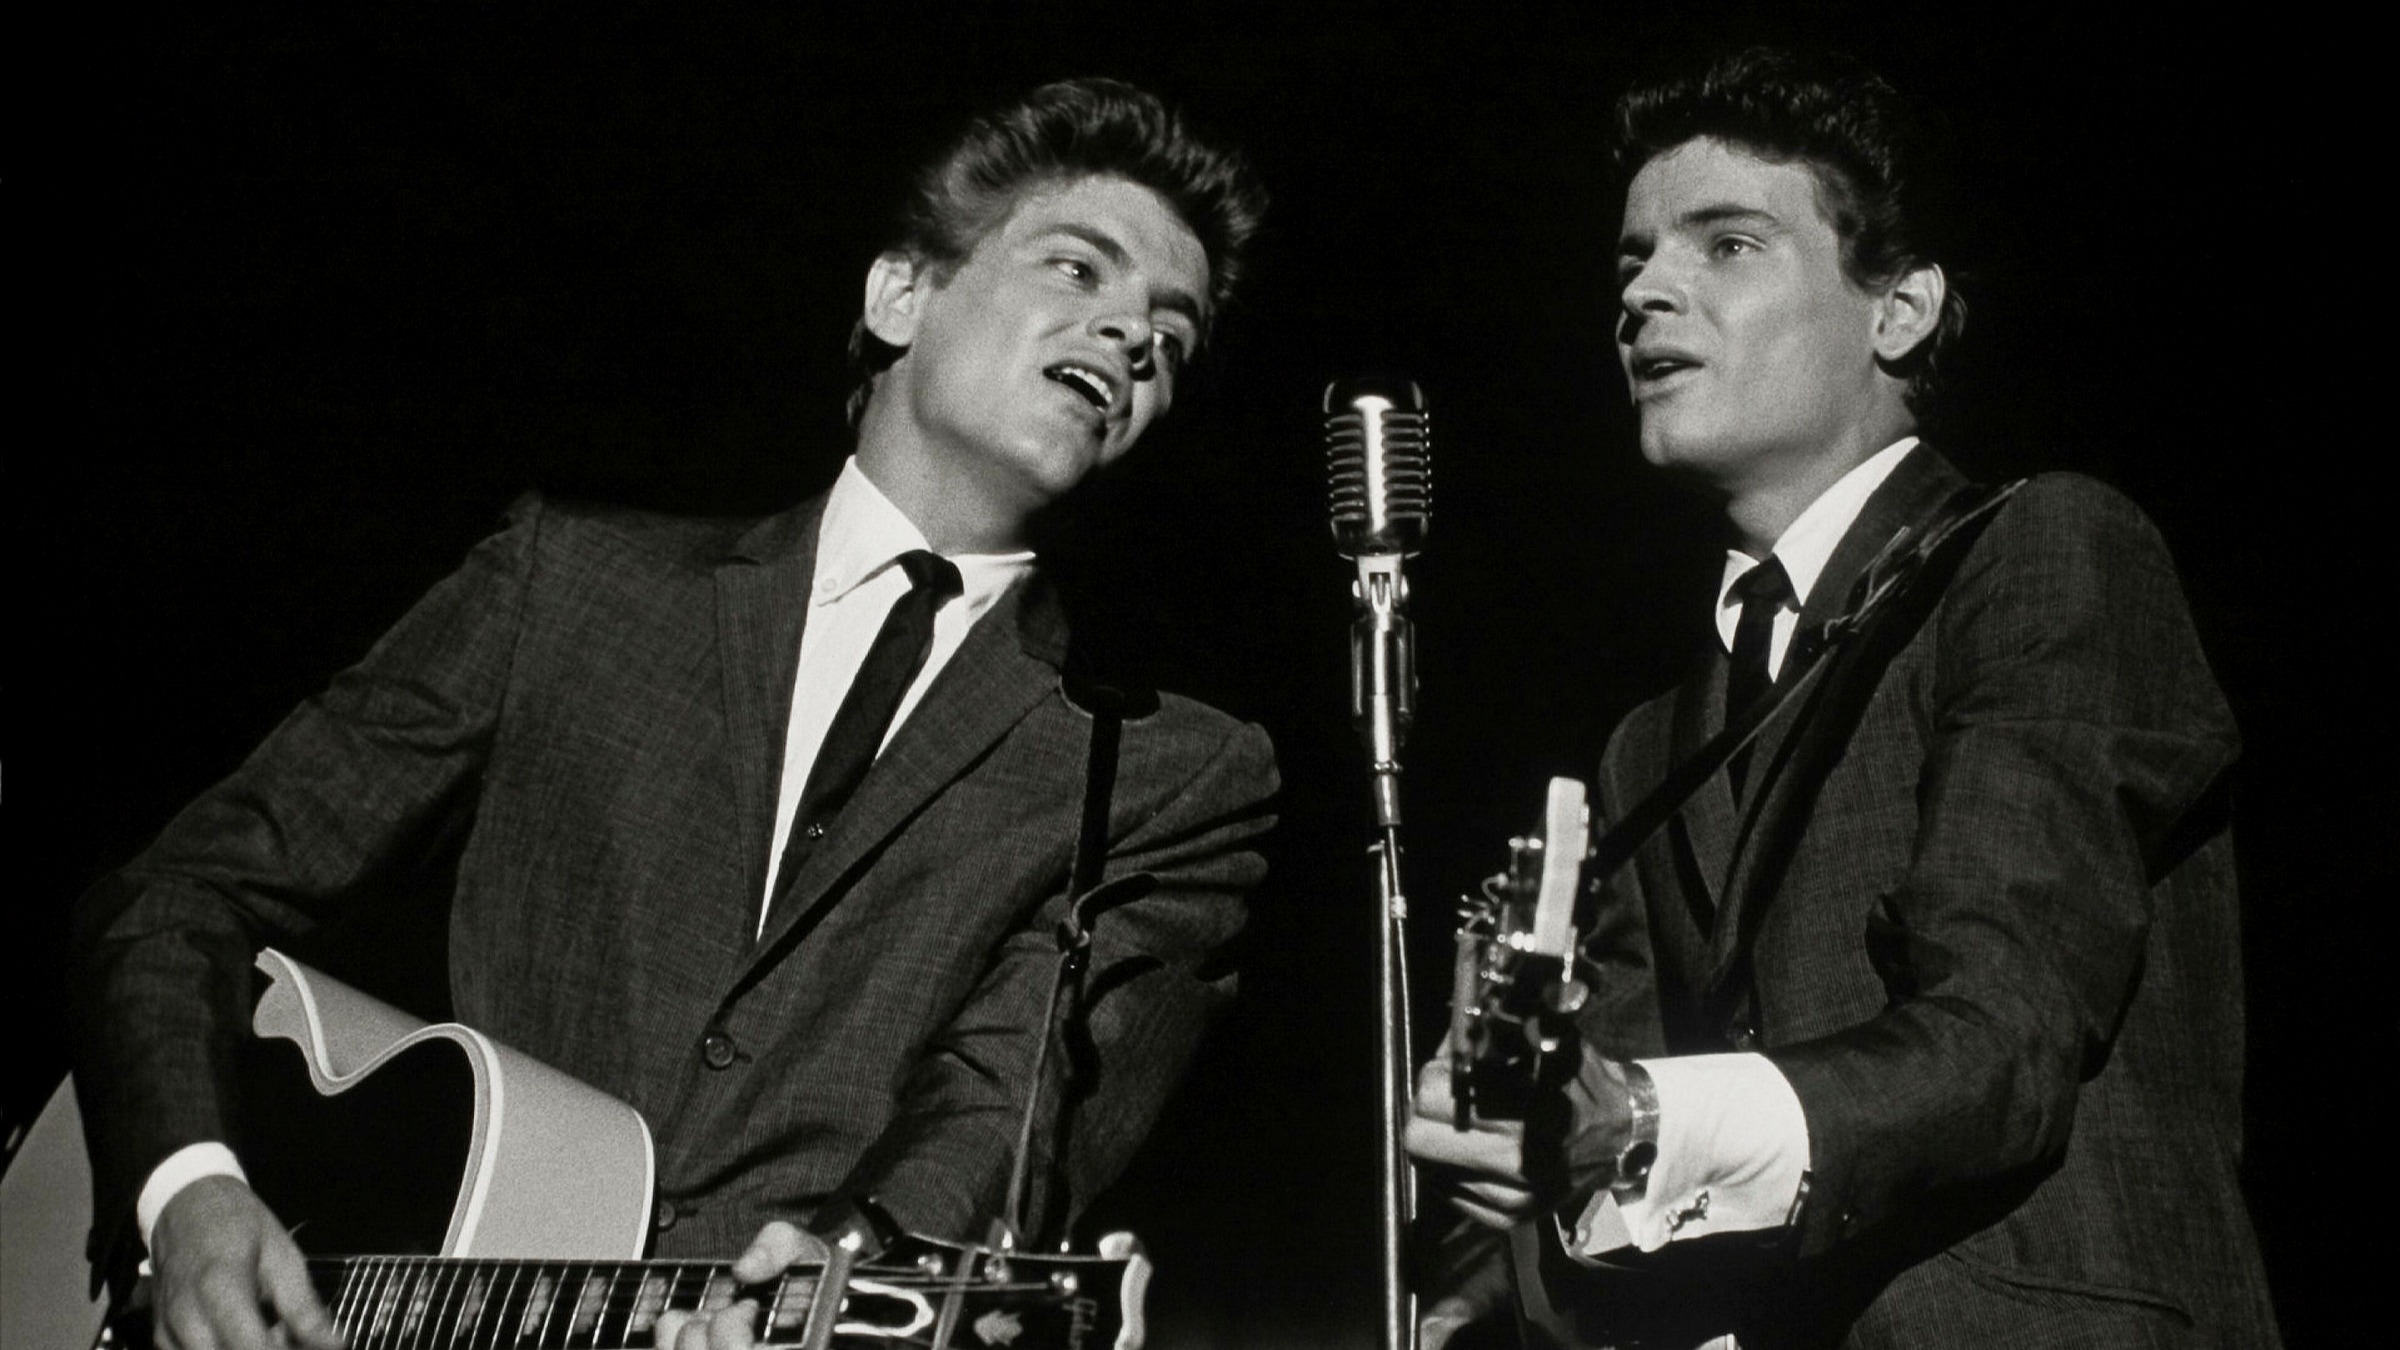 Love Hurts — a song recorded 60 years ago by the Everly Brothers has had a colourful afterlife — FT.com